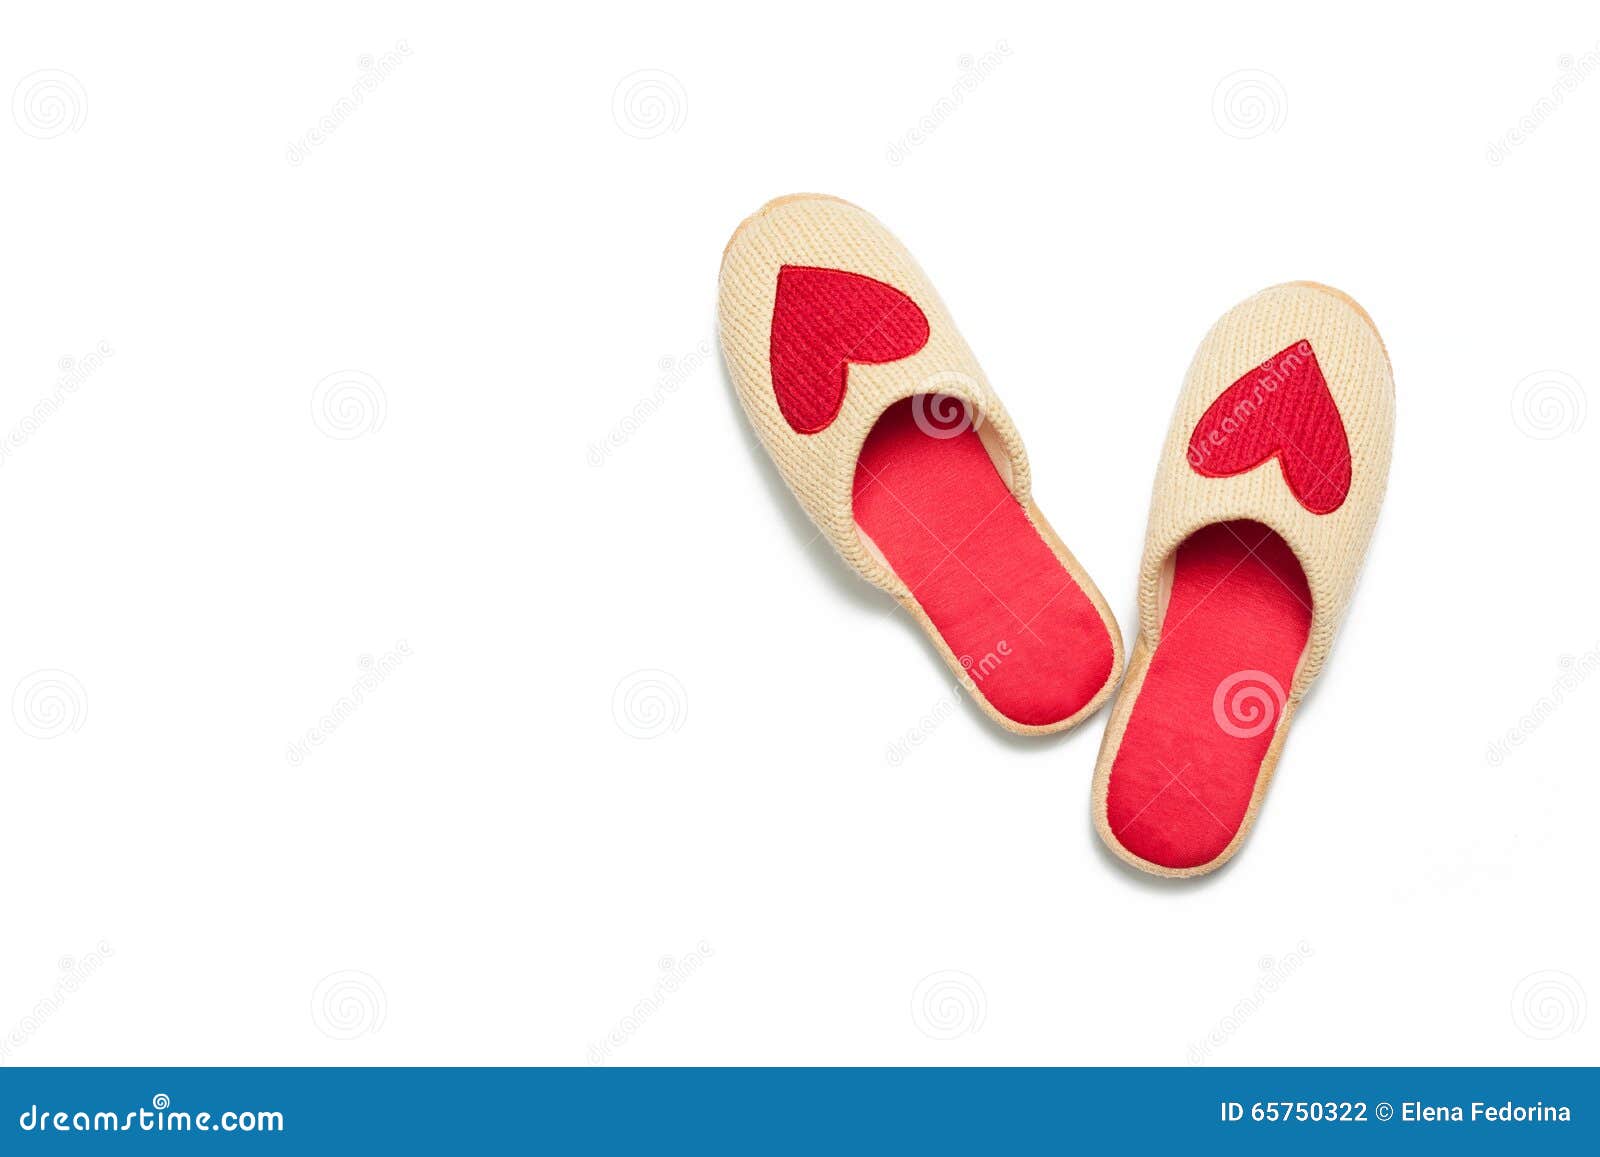 Slippers with hearts stock photo. Image of pair, sign - 65750322